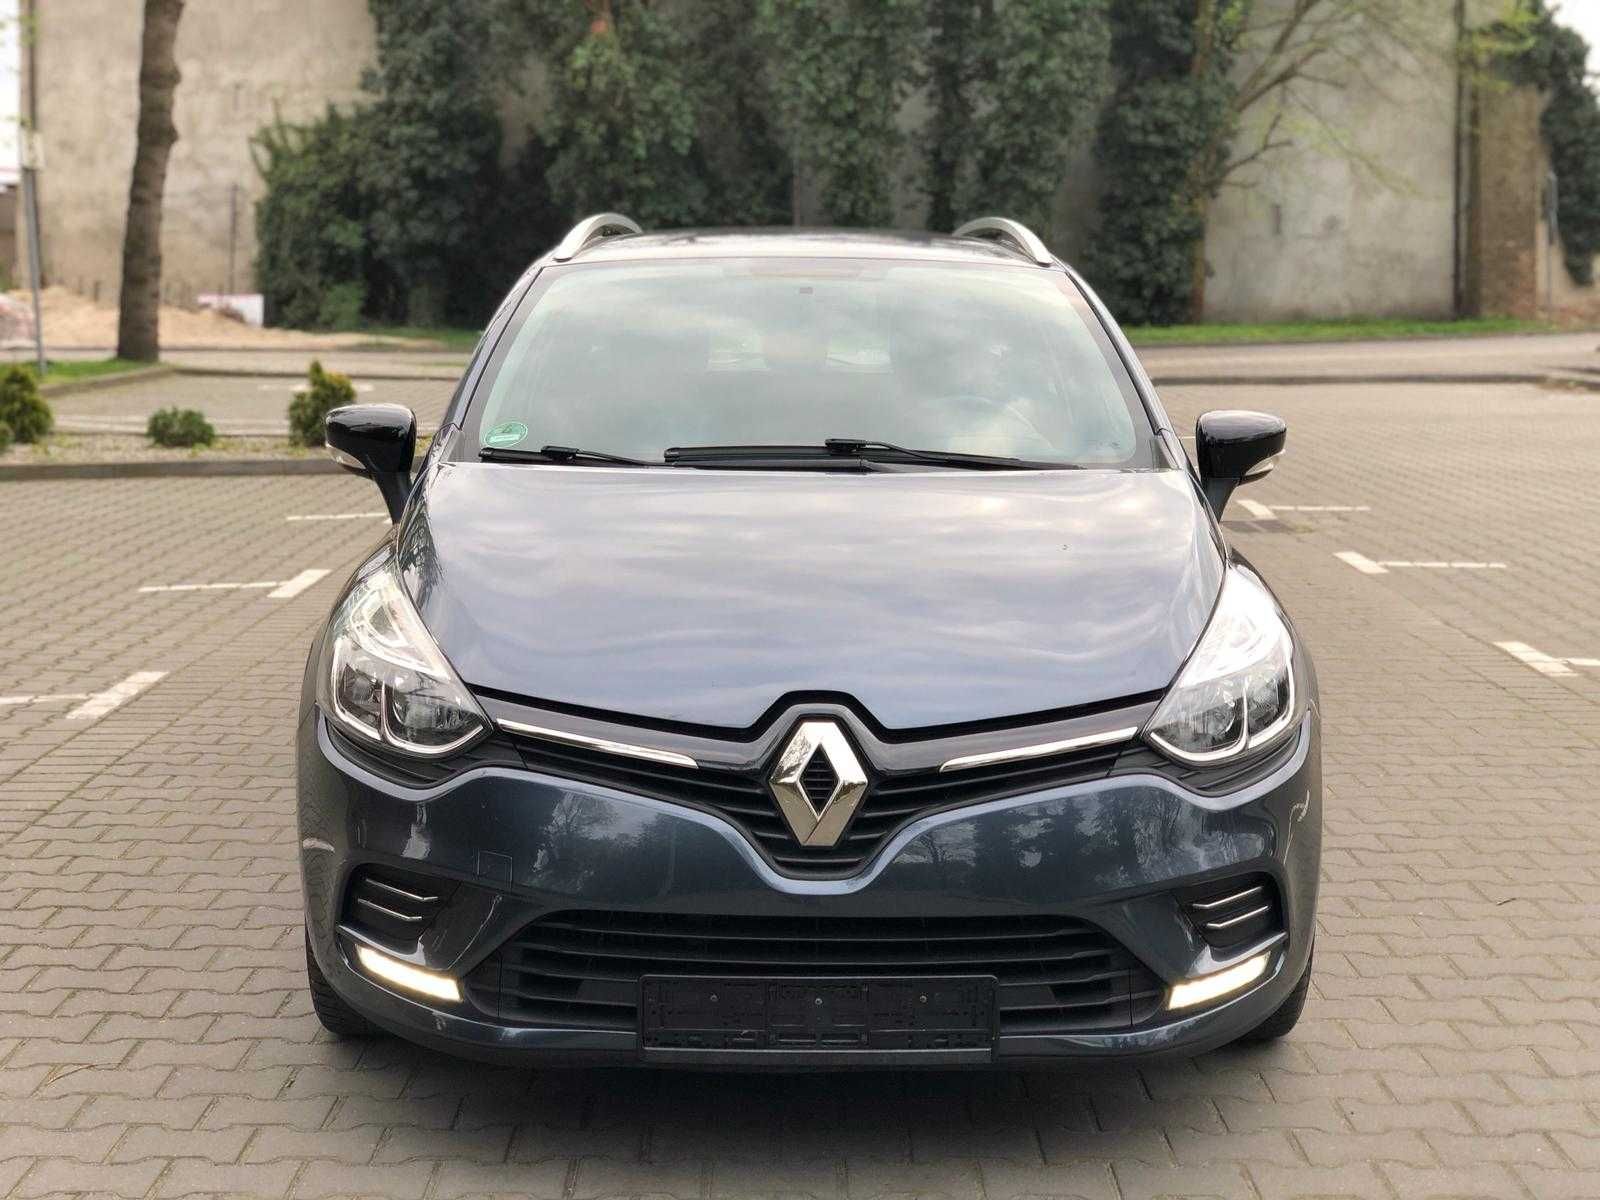 Renault clio 1.5 dci 2016r Limited tempomat. Bass reflex.